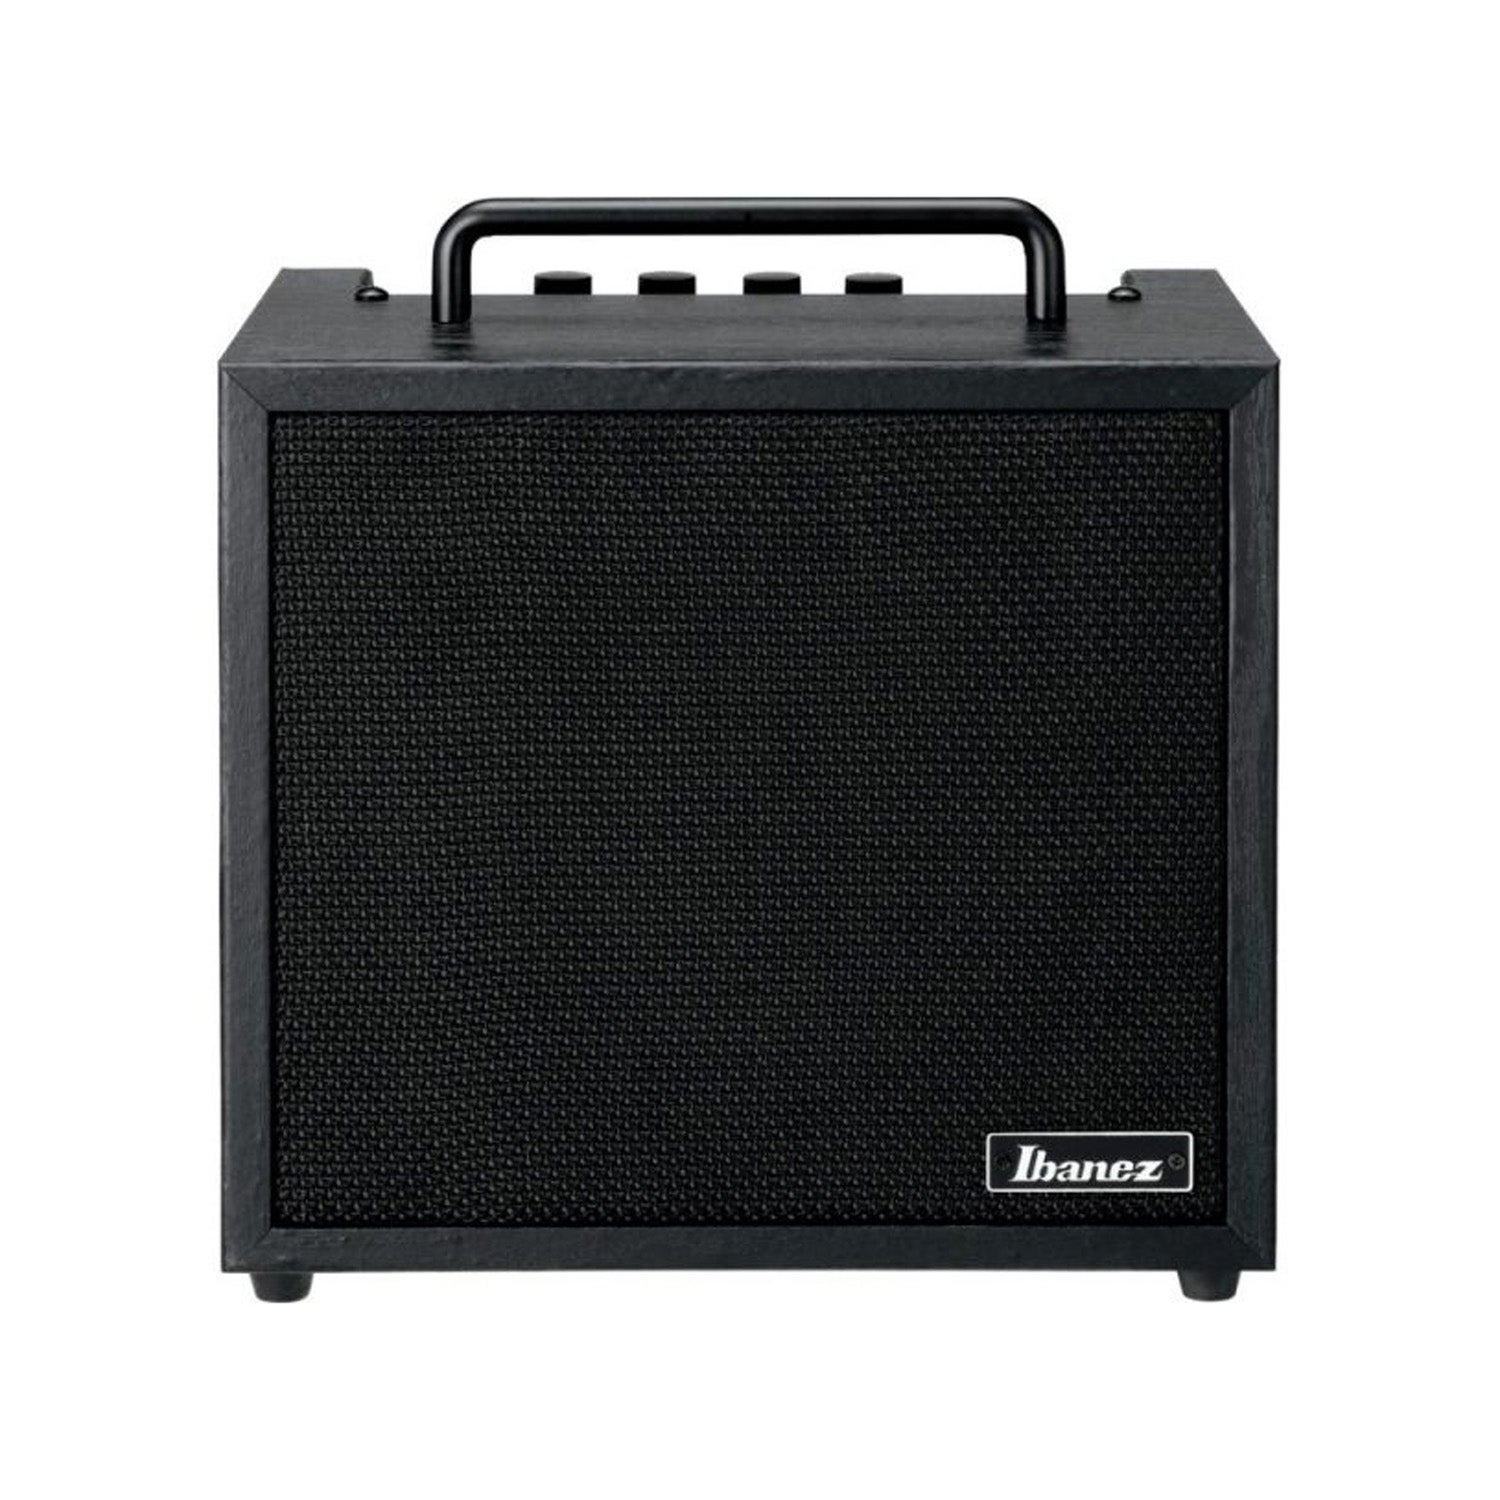 Ibanez Ibz10bv2 Bass Guitar Combo Amplifier 10w Reverb | Music Works